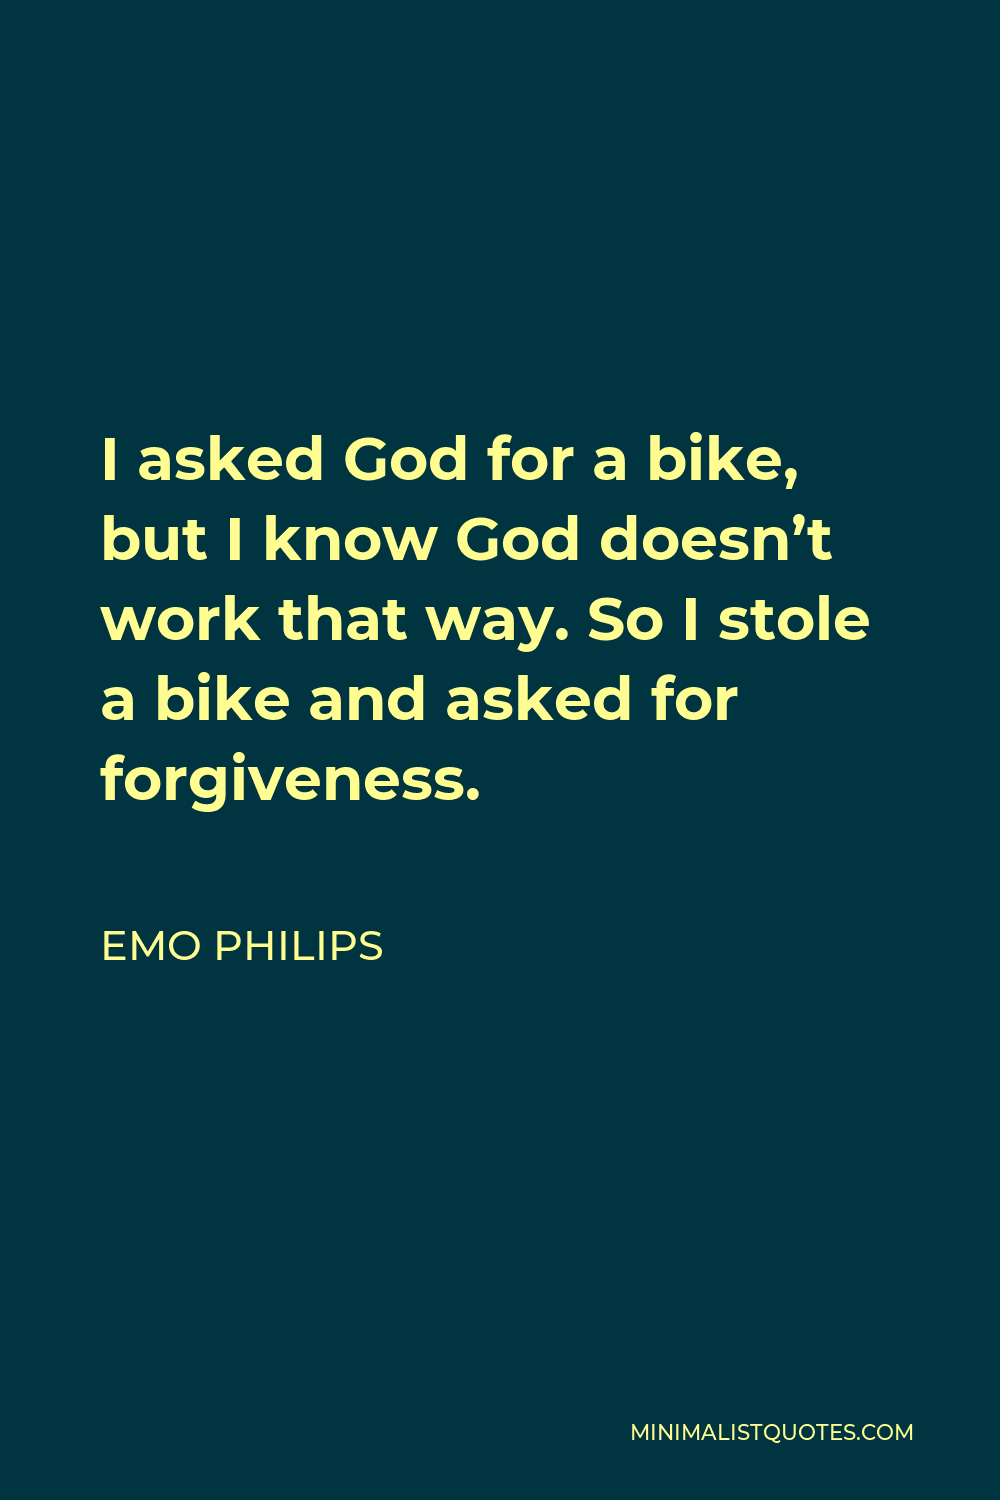 Emo Philips Quote - I asked God for a bike, but I know God doesn’t work that way. So I stole a bike and asked for forgiveness.